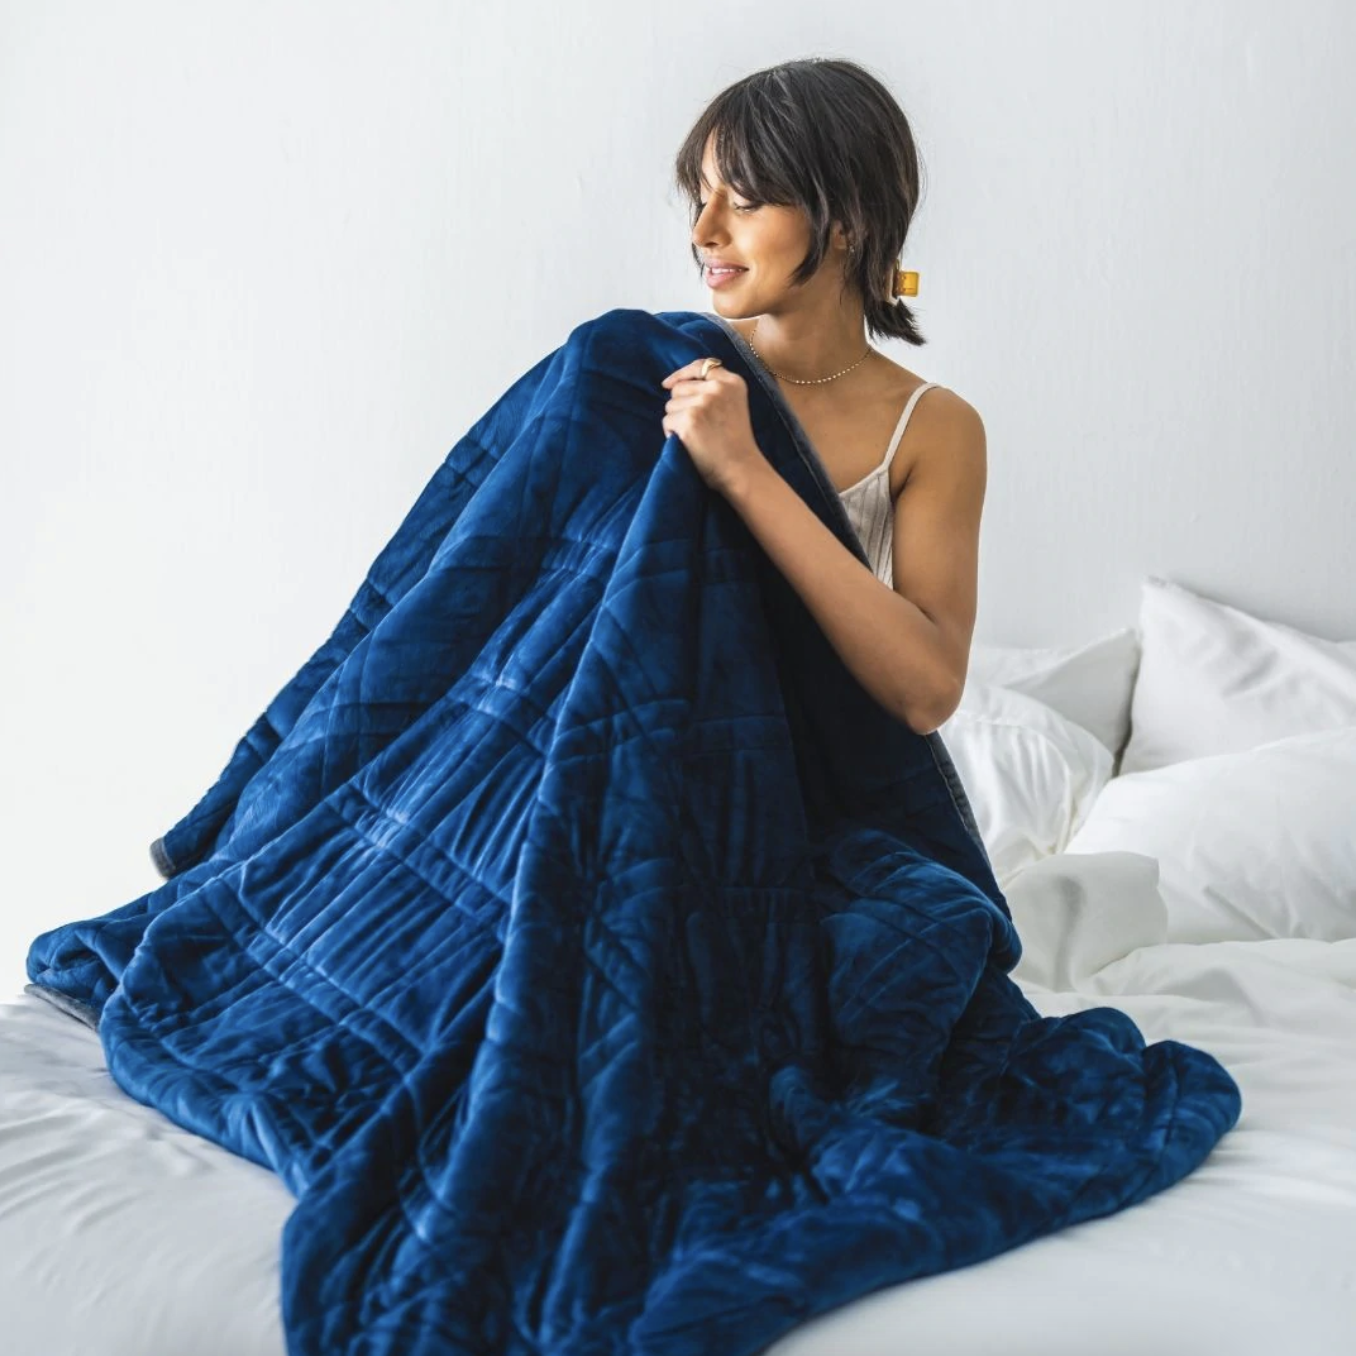 model sitting on a bed wrapped in the blue weighted blanket